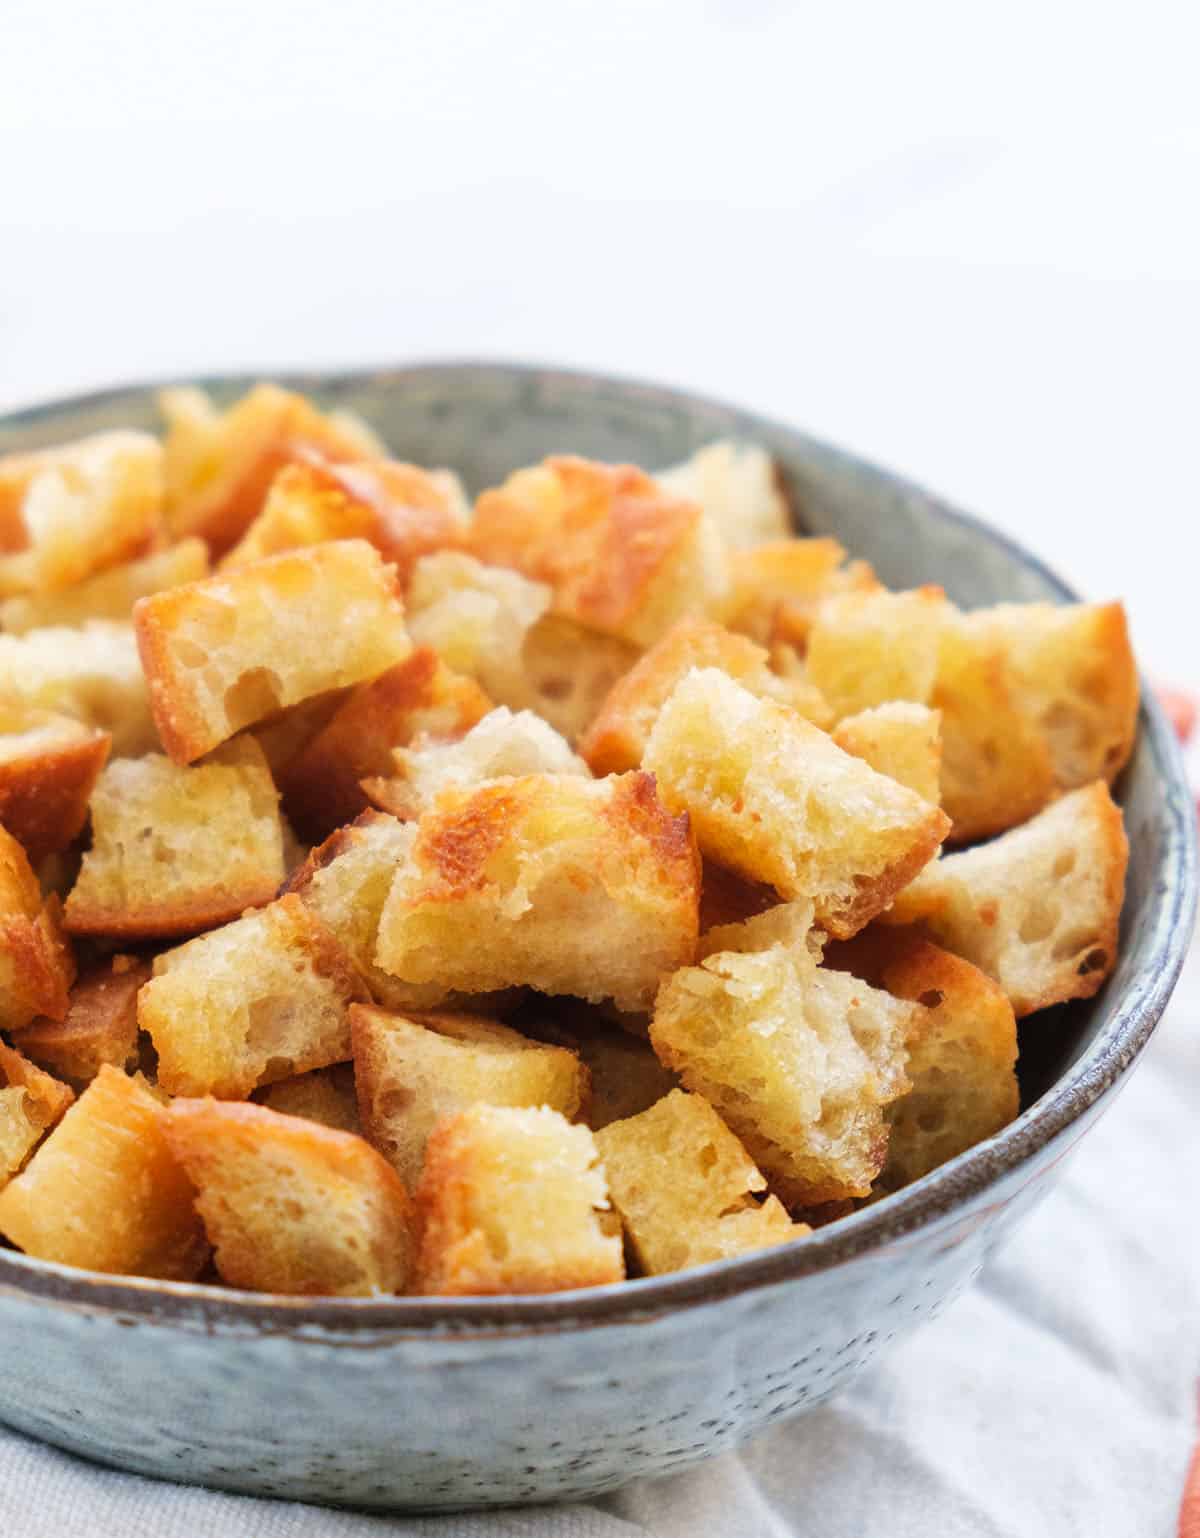 Close-up of a grey bowl full of golden croutons made on the stove over a white background.